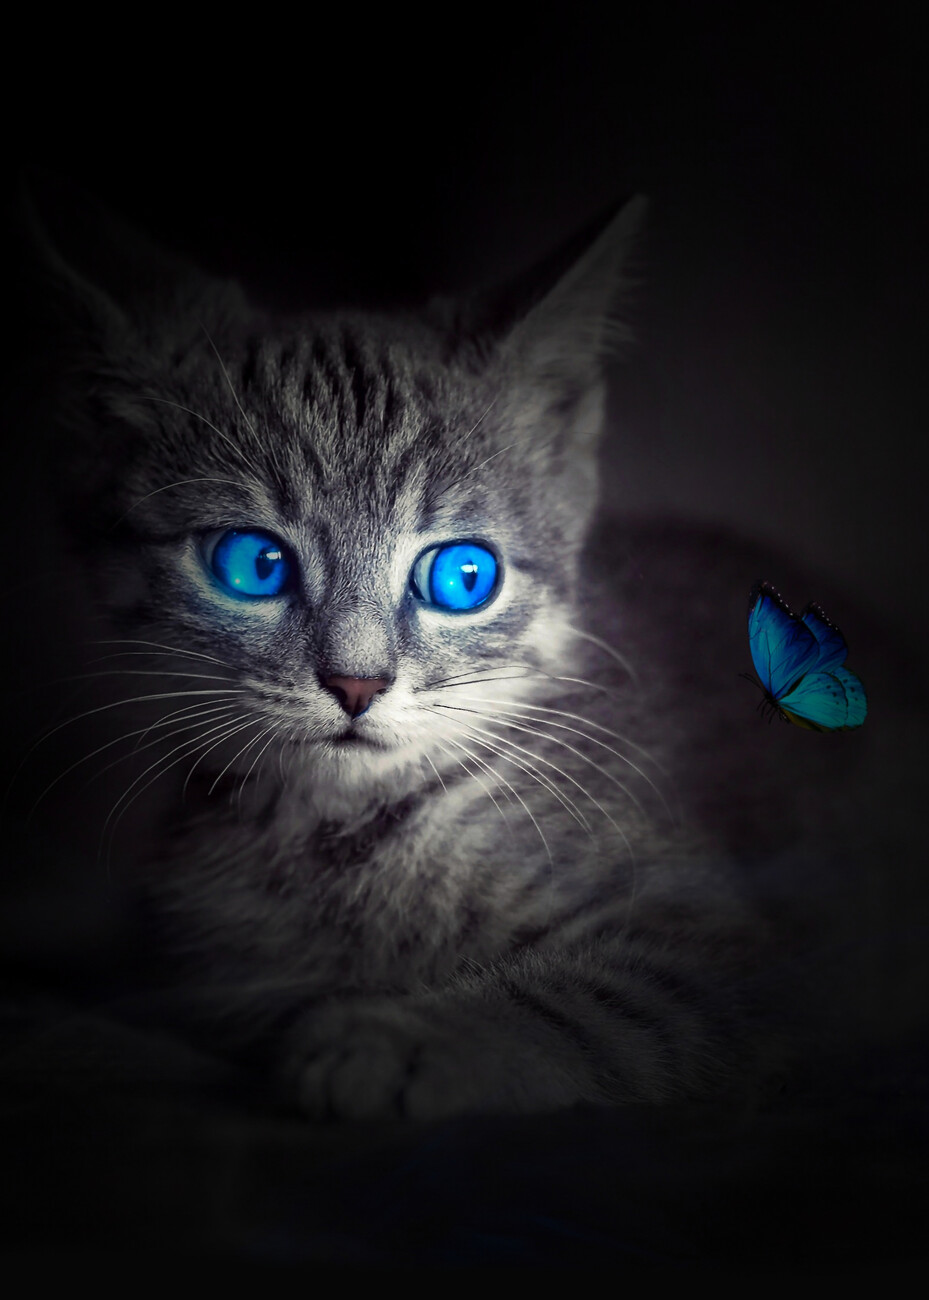 Cute Kitten with blue eyes and Butterfly | Posters, Art Prints ...